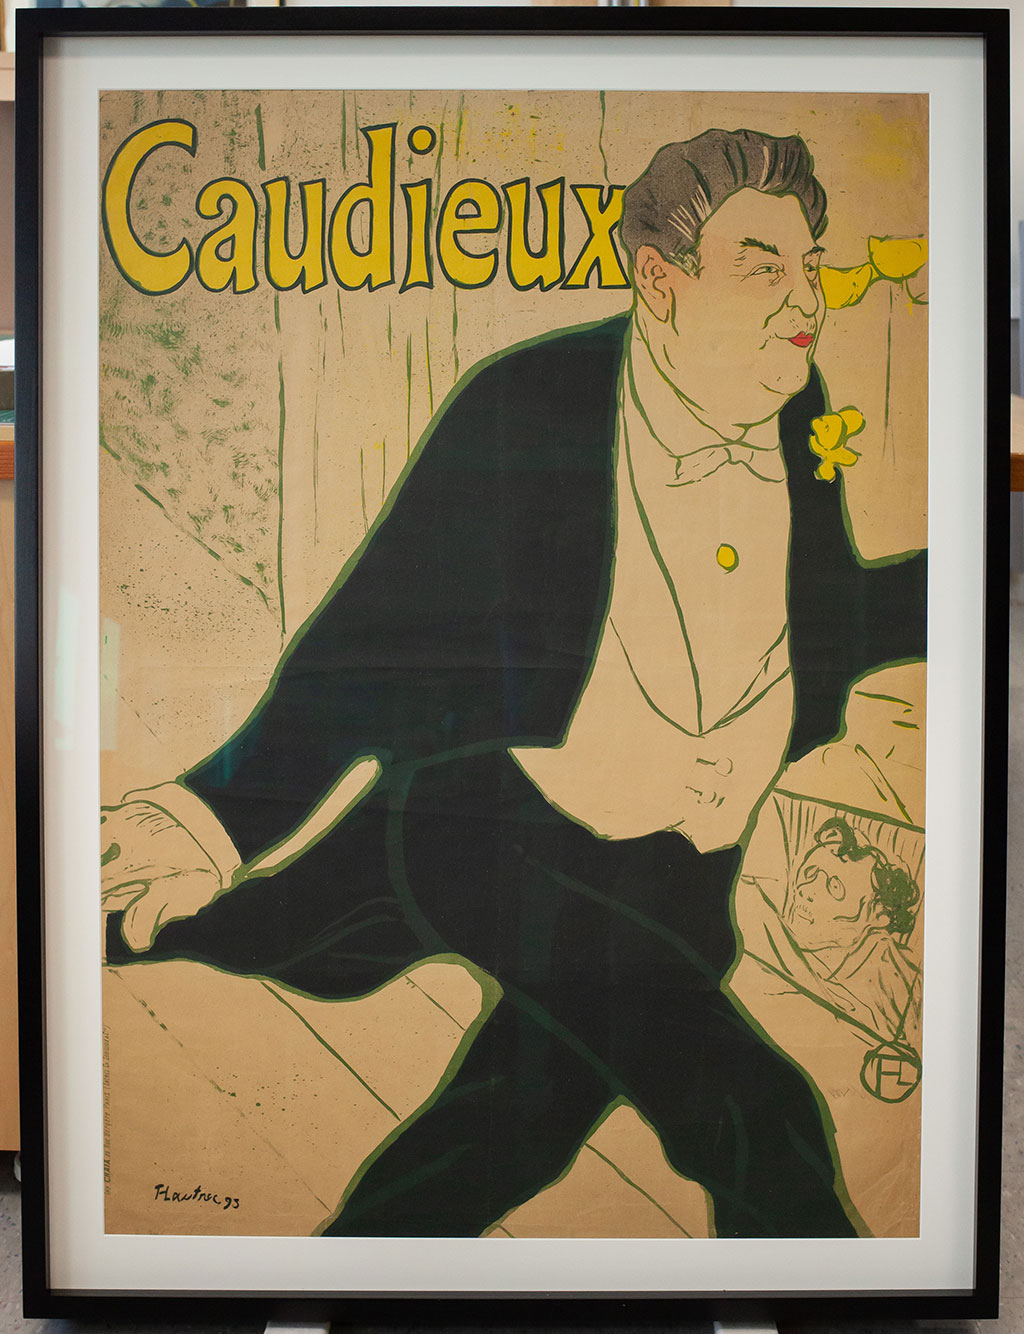 Caudieux, over-matted for display at the Museum of Fine Arts, Boston